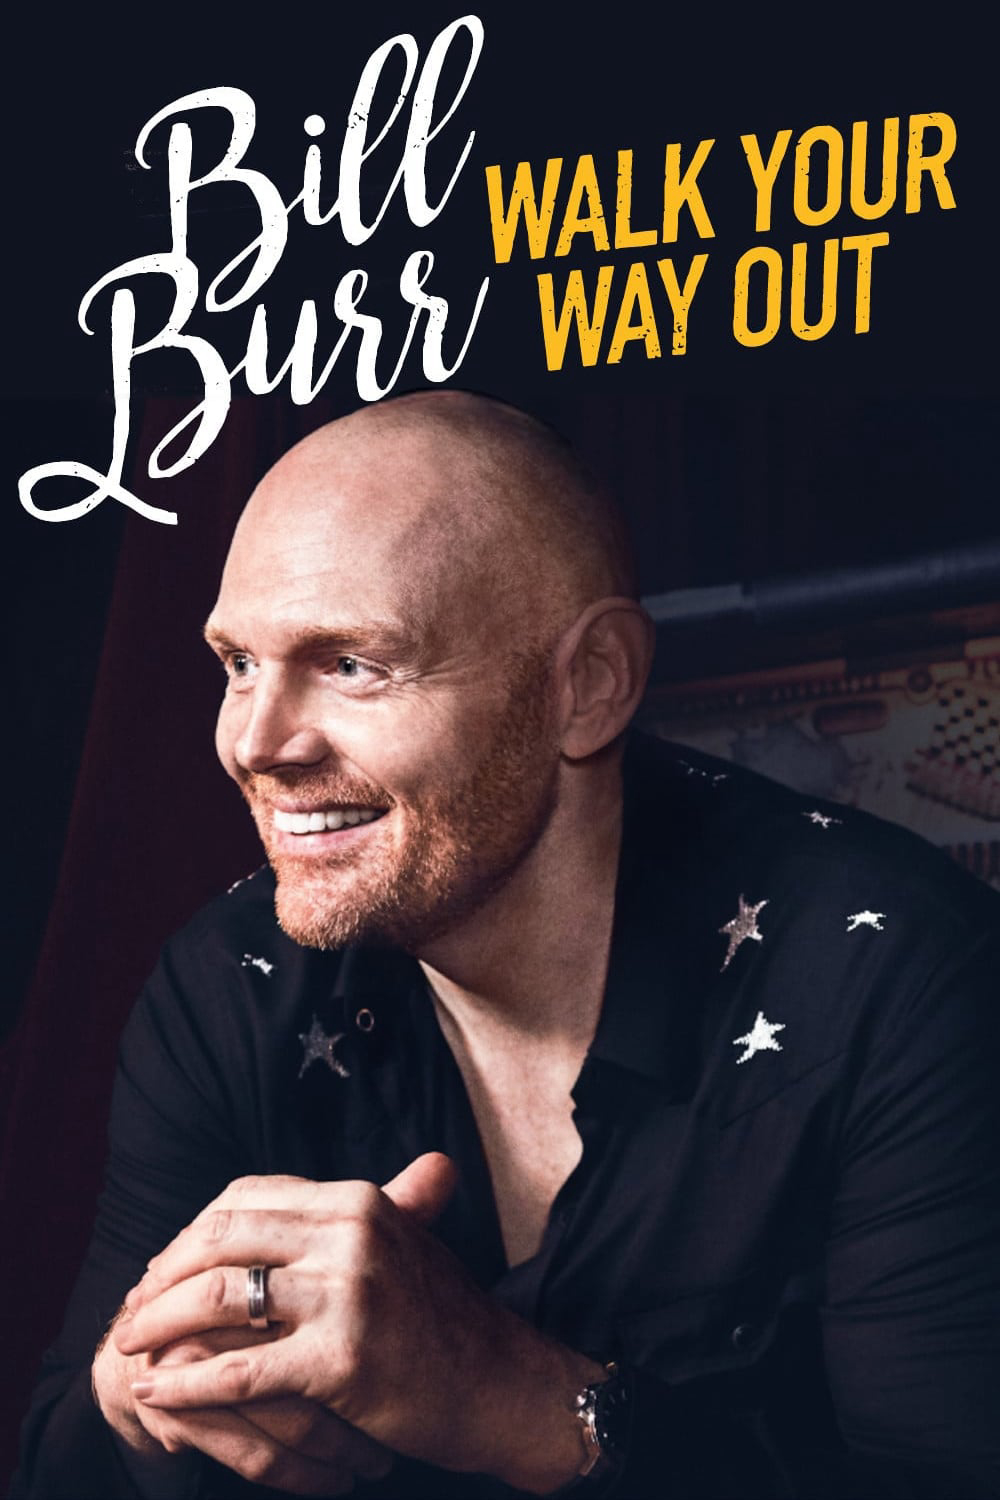 Bill Burr: Walk Your Way Out - Bill Burr: Walk Your Way Out